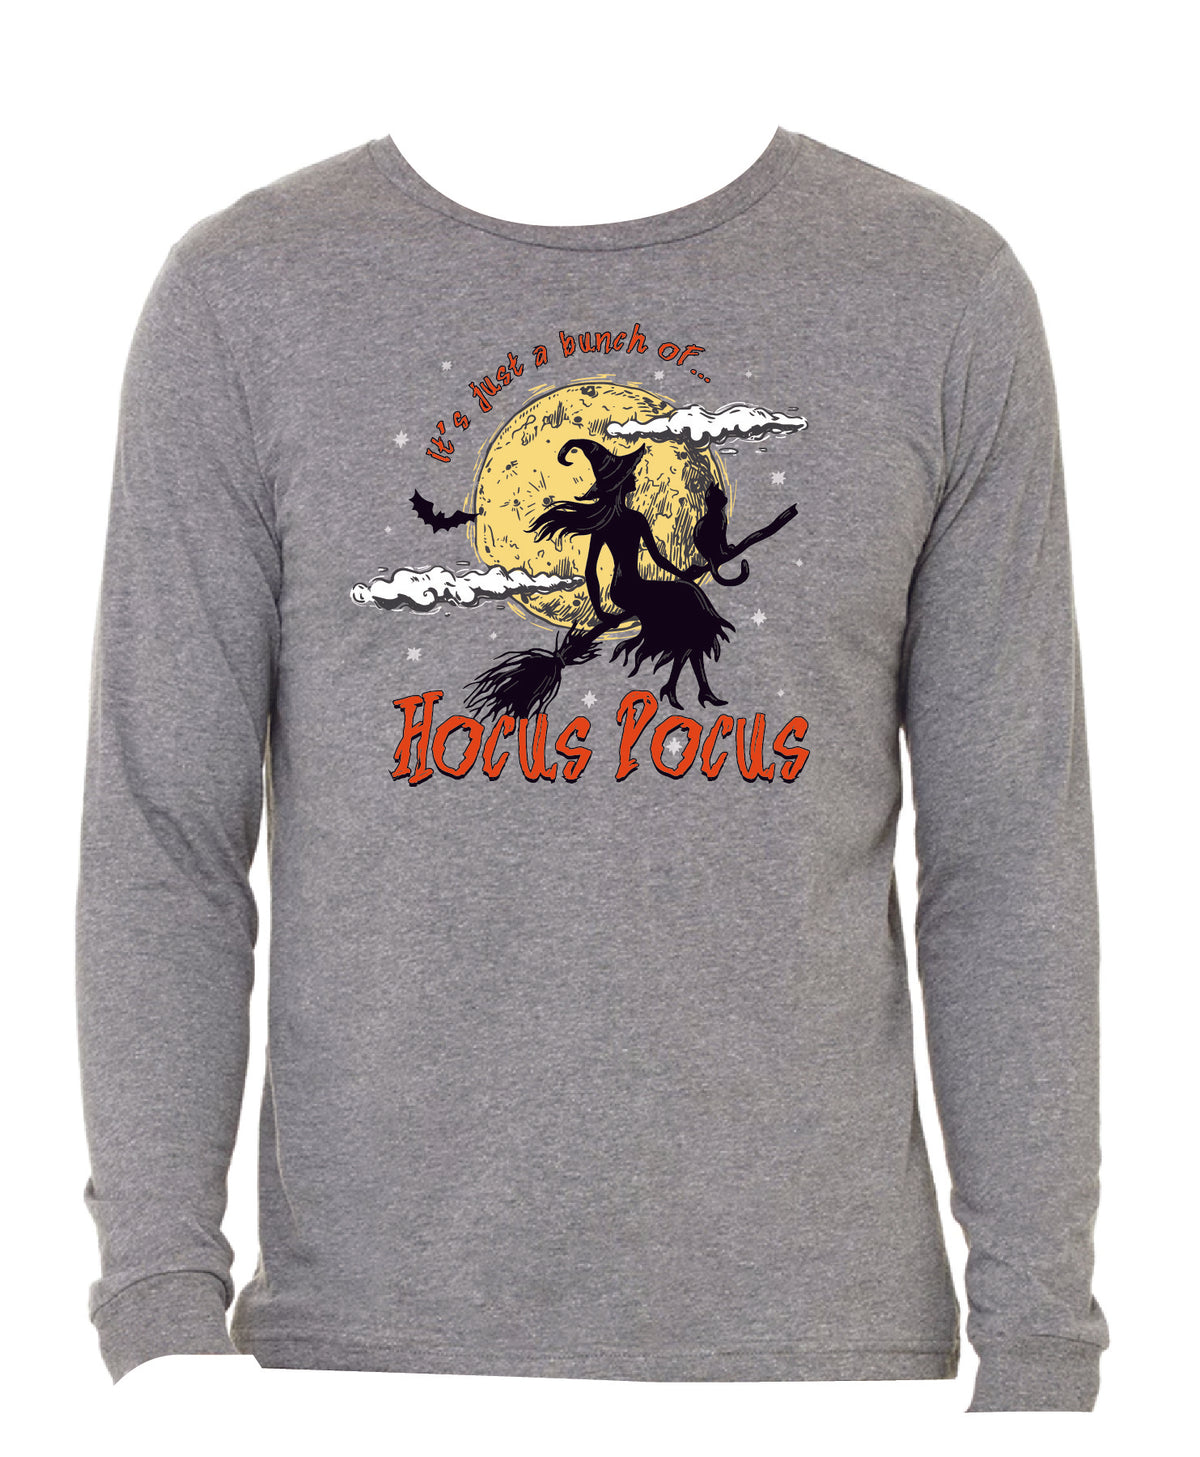 It's Just A Bunch Of Hocus Pocus Steel Grey Long Sleeve T-Shirt